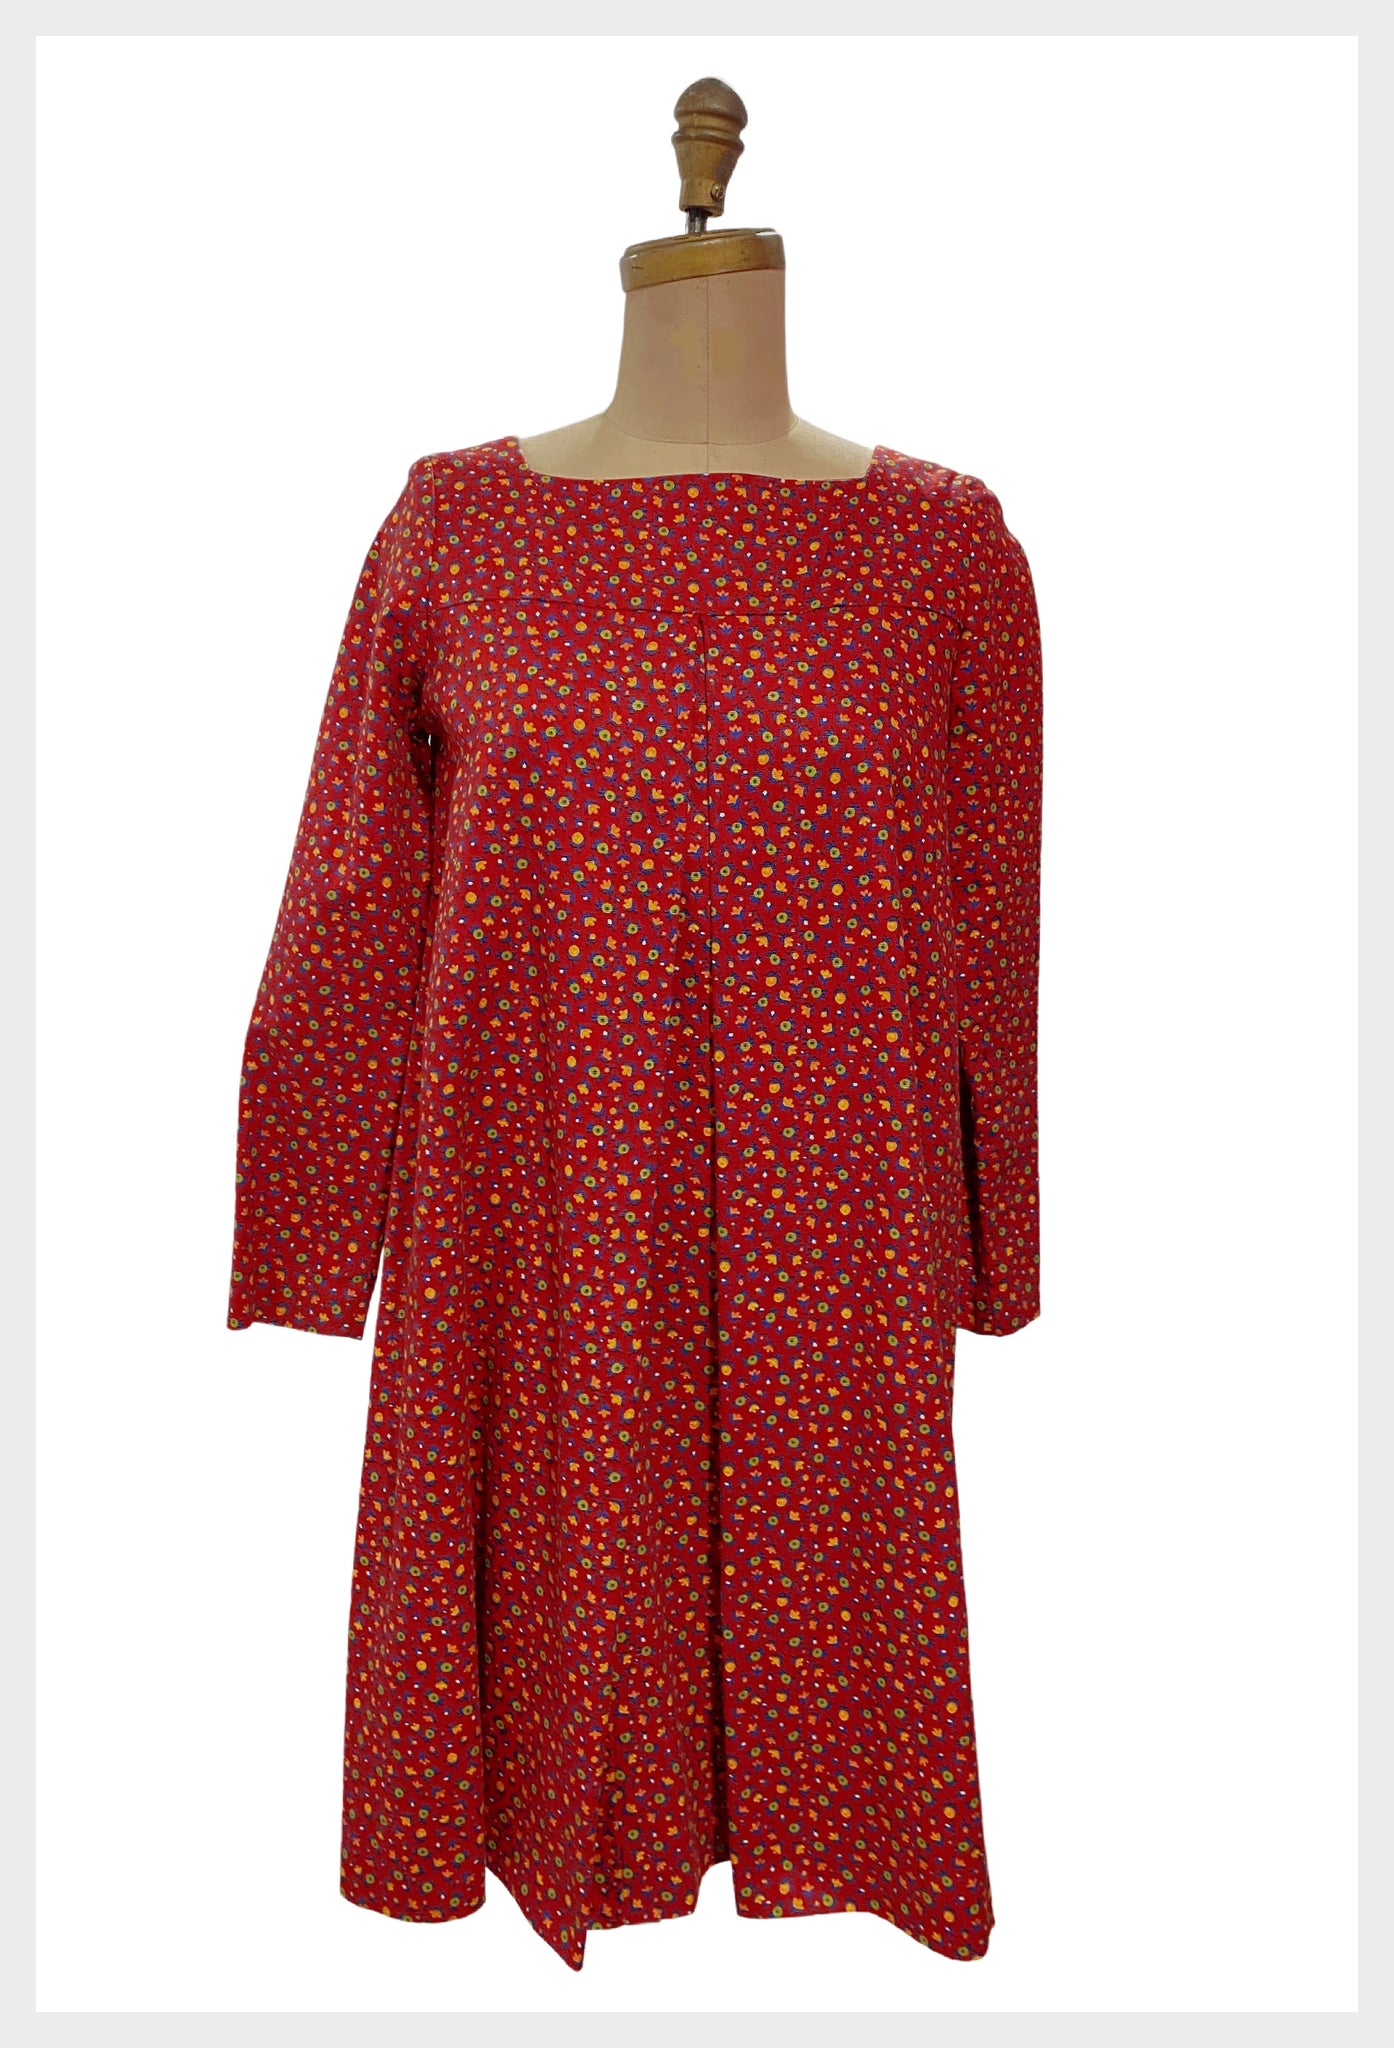 1970s red calico smock prairie floral print dress | size small - medium